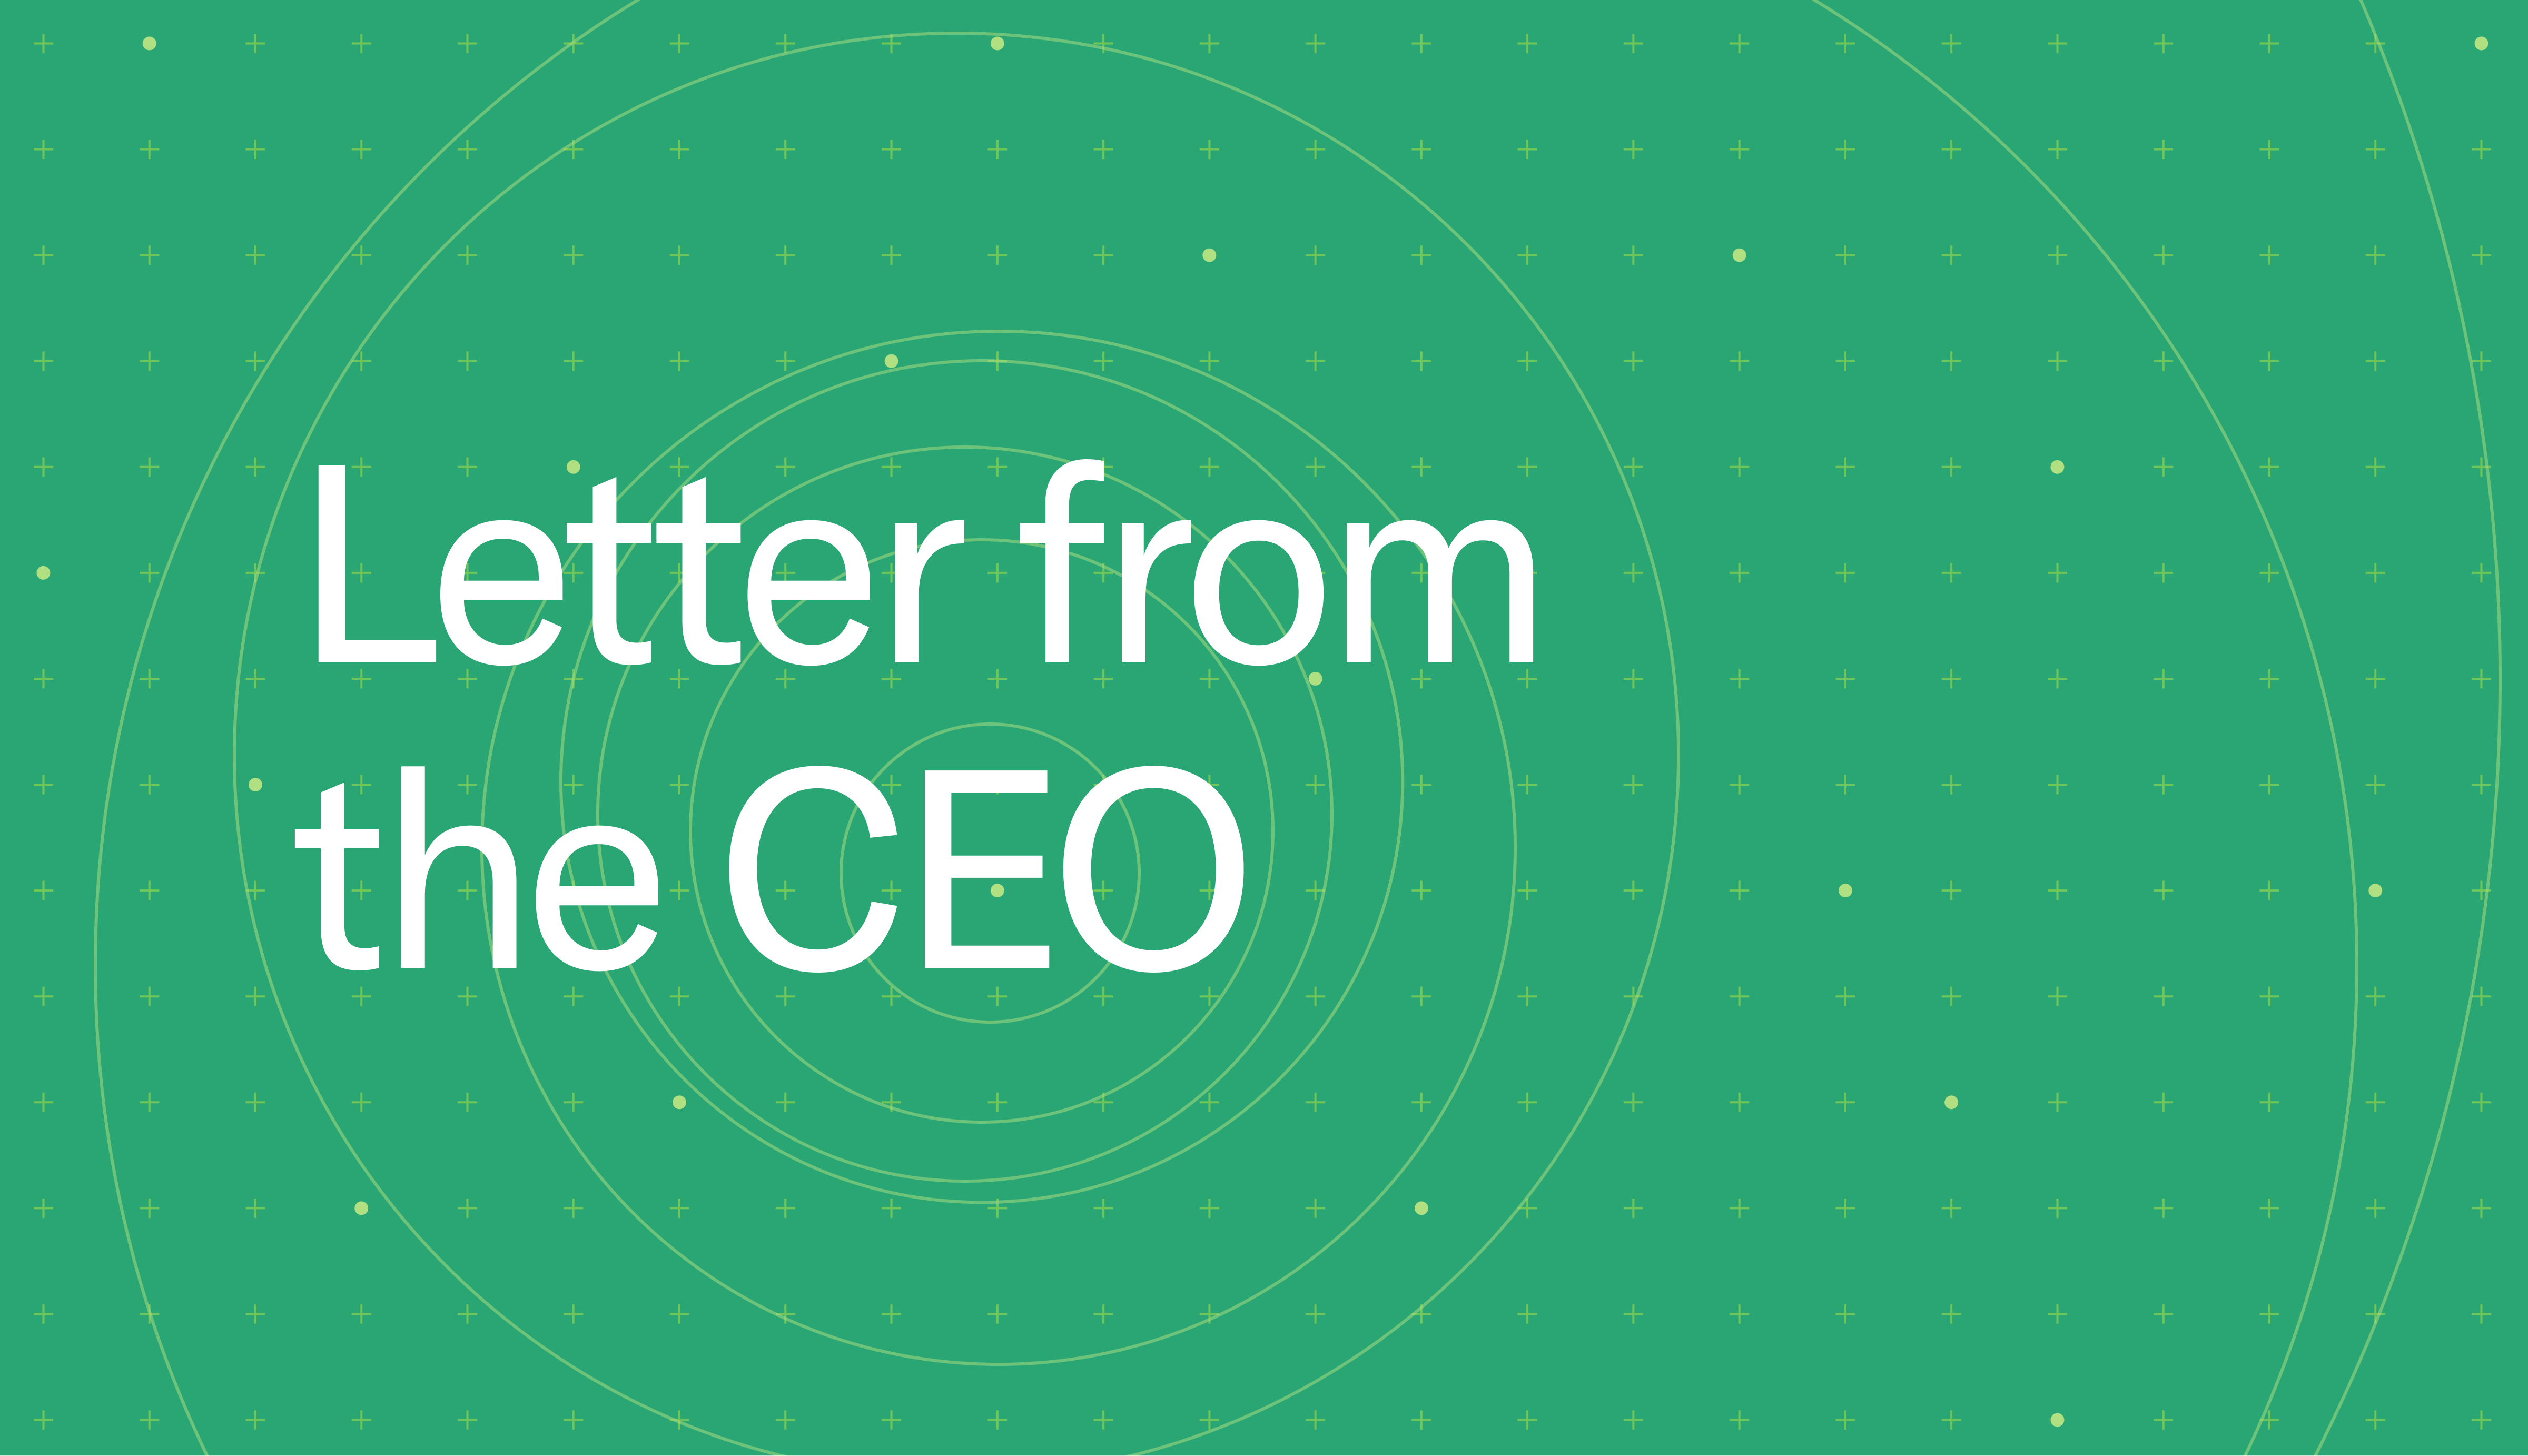 Green background with title reading "Letter from the CEO" in white